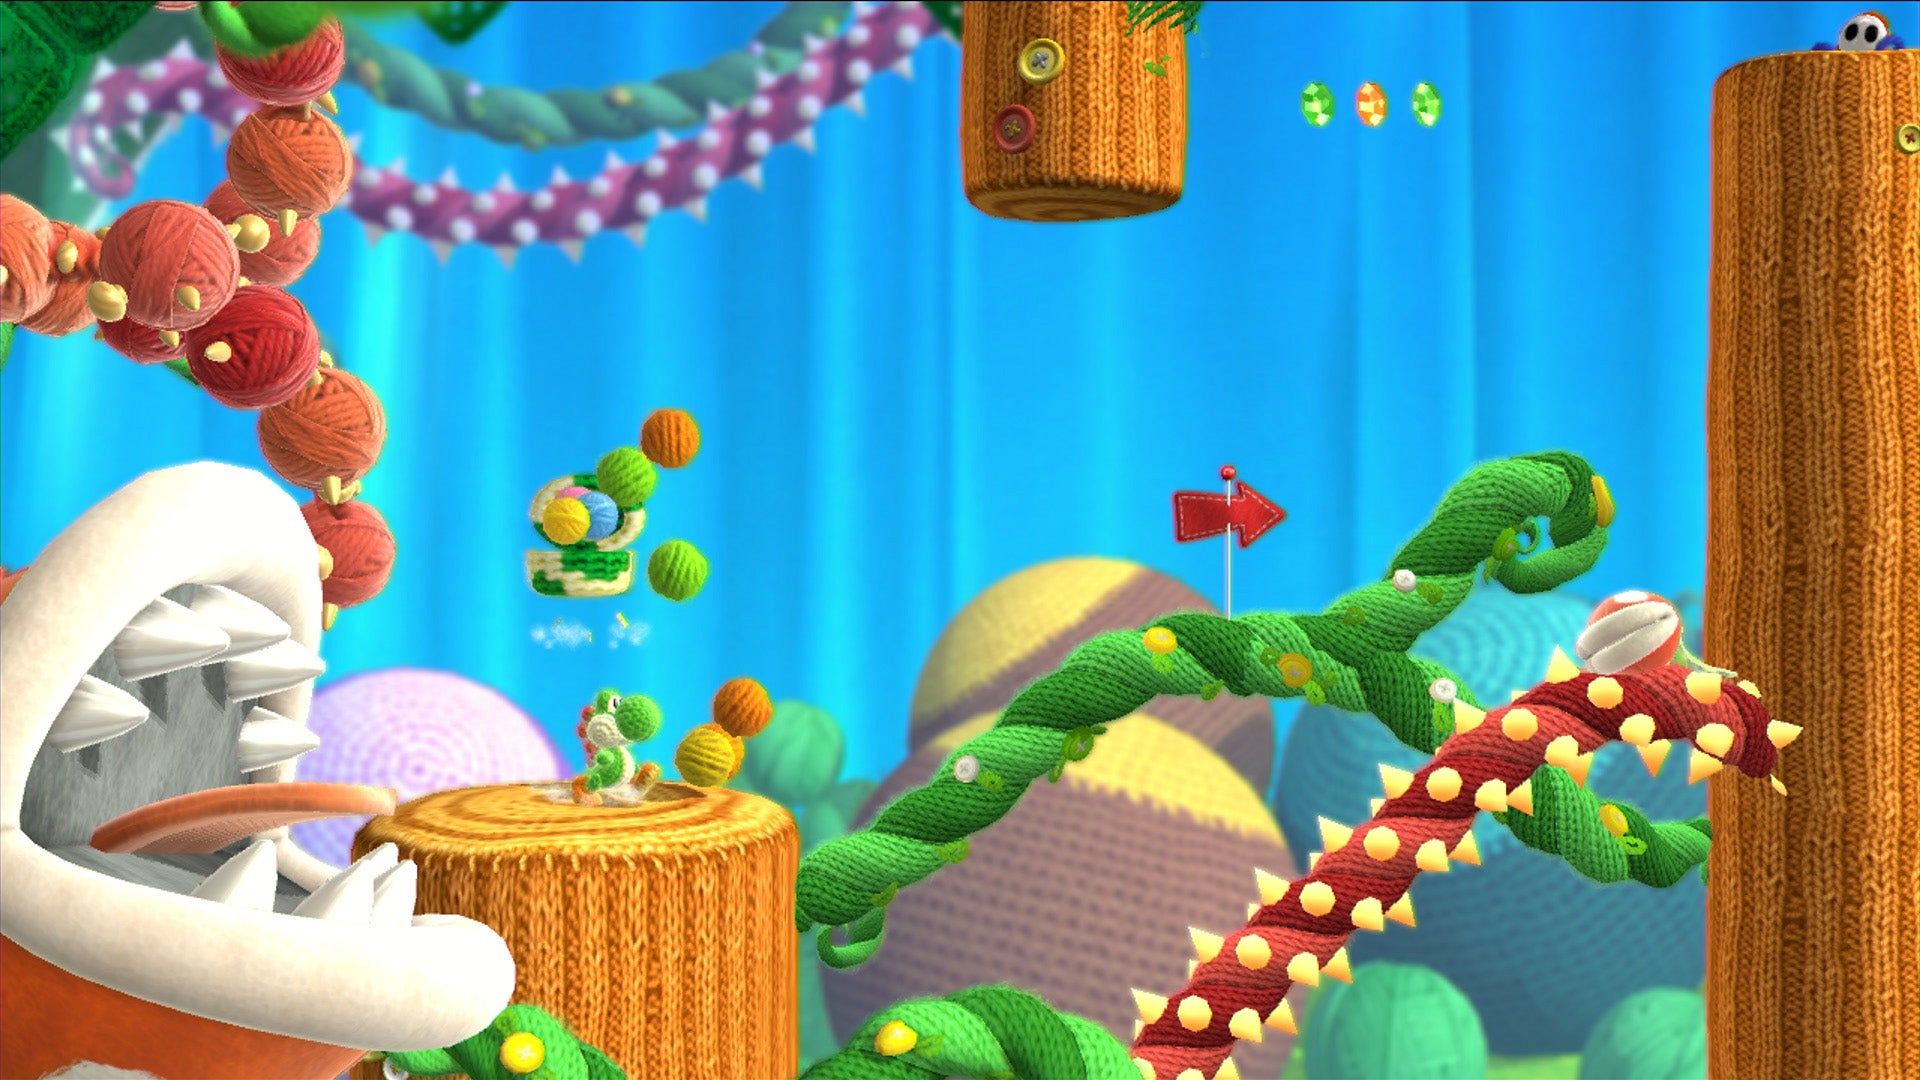 Yoshi's Woolly World review: a visual aesthetic that is simply mesmerising - Super Mario